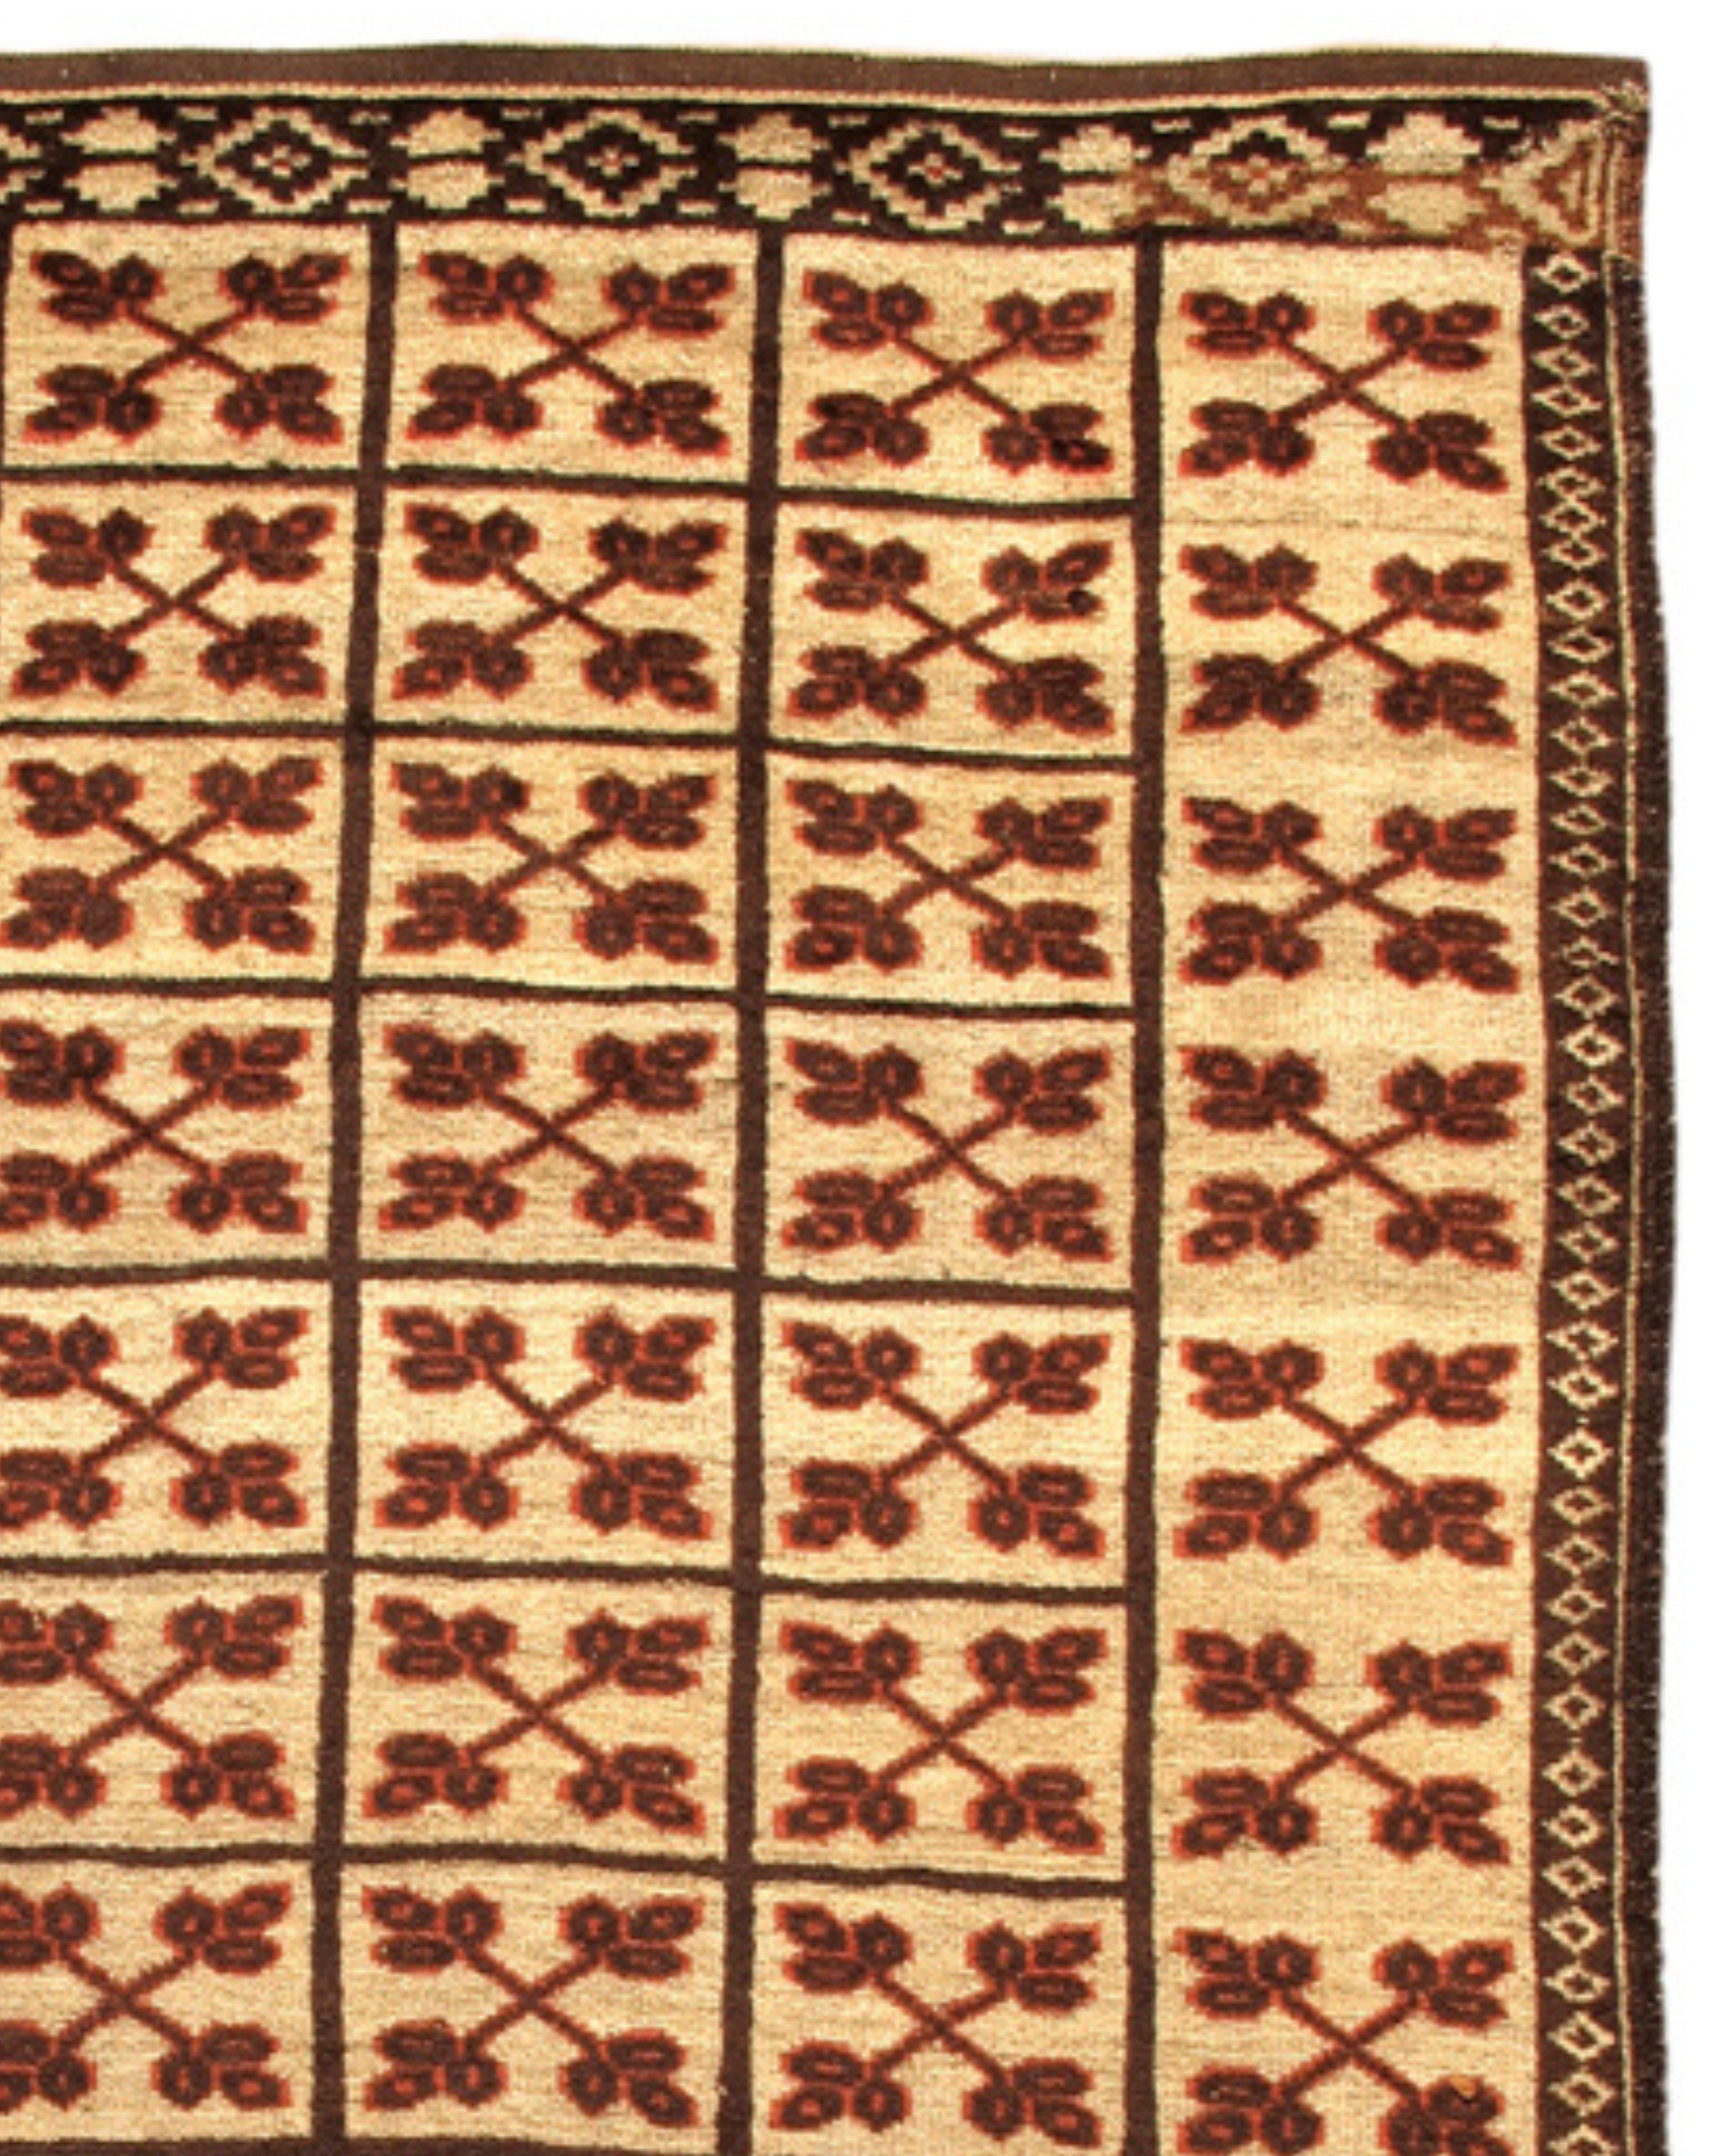 Antique Bashir Rug, Late 19th Century

Additional information:
Dimensions: 3'1